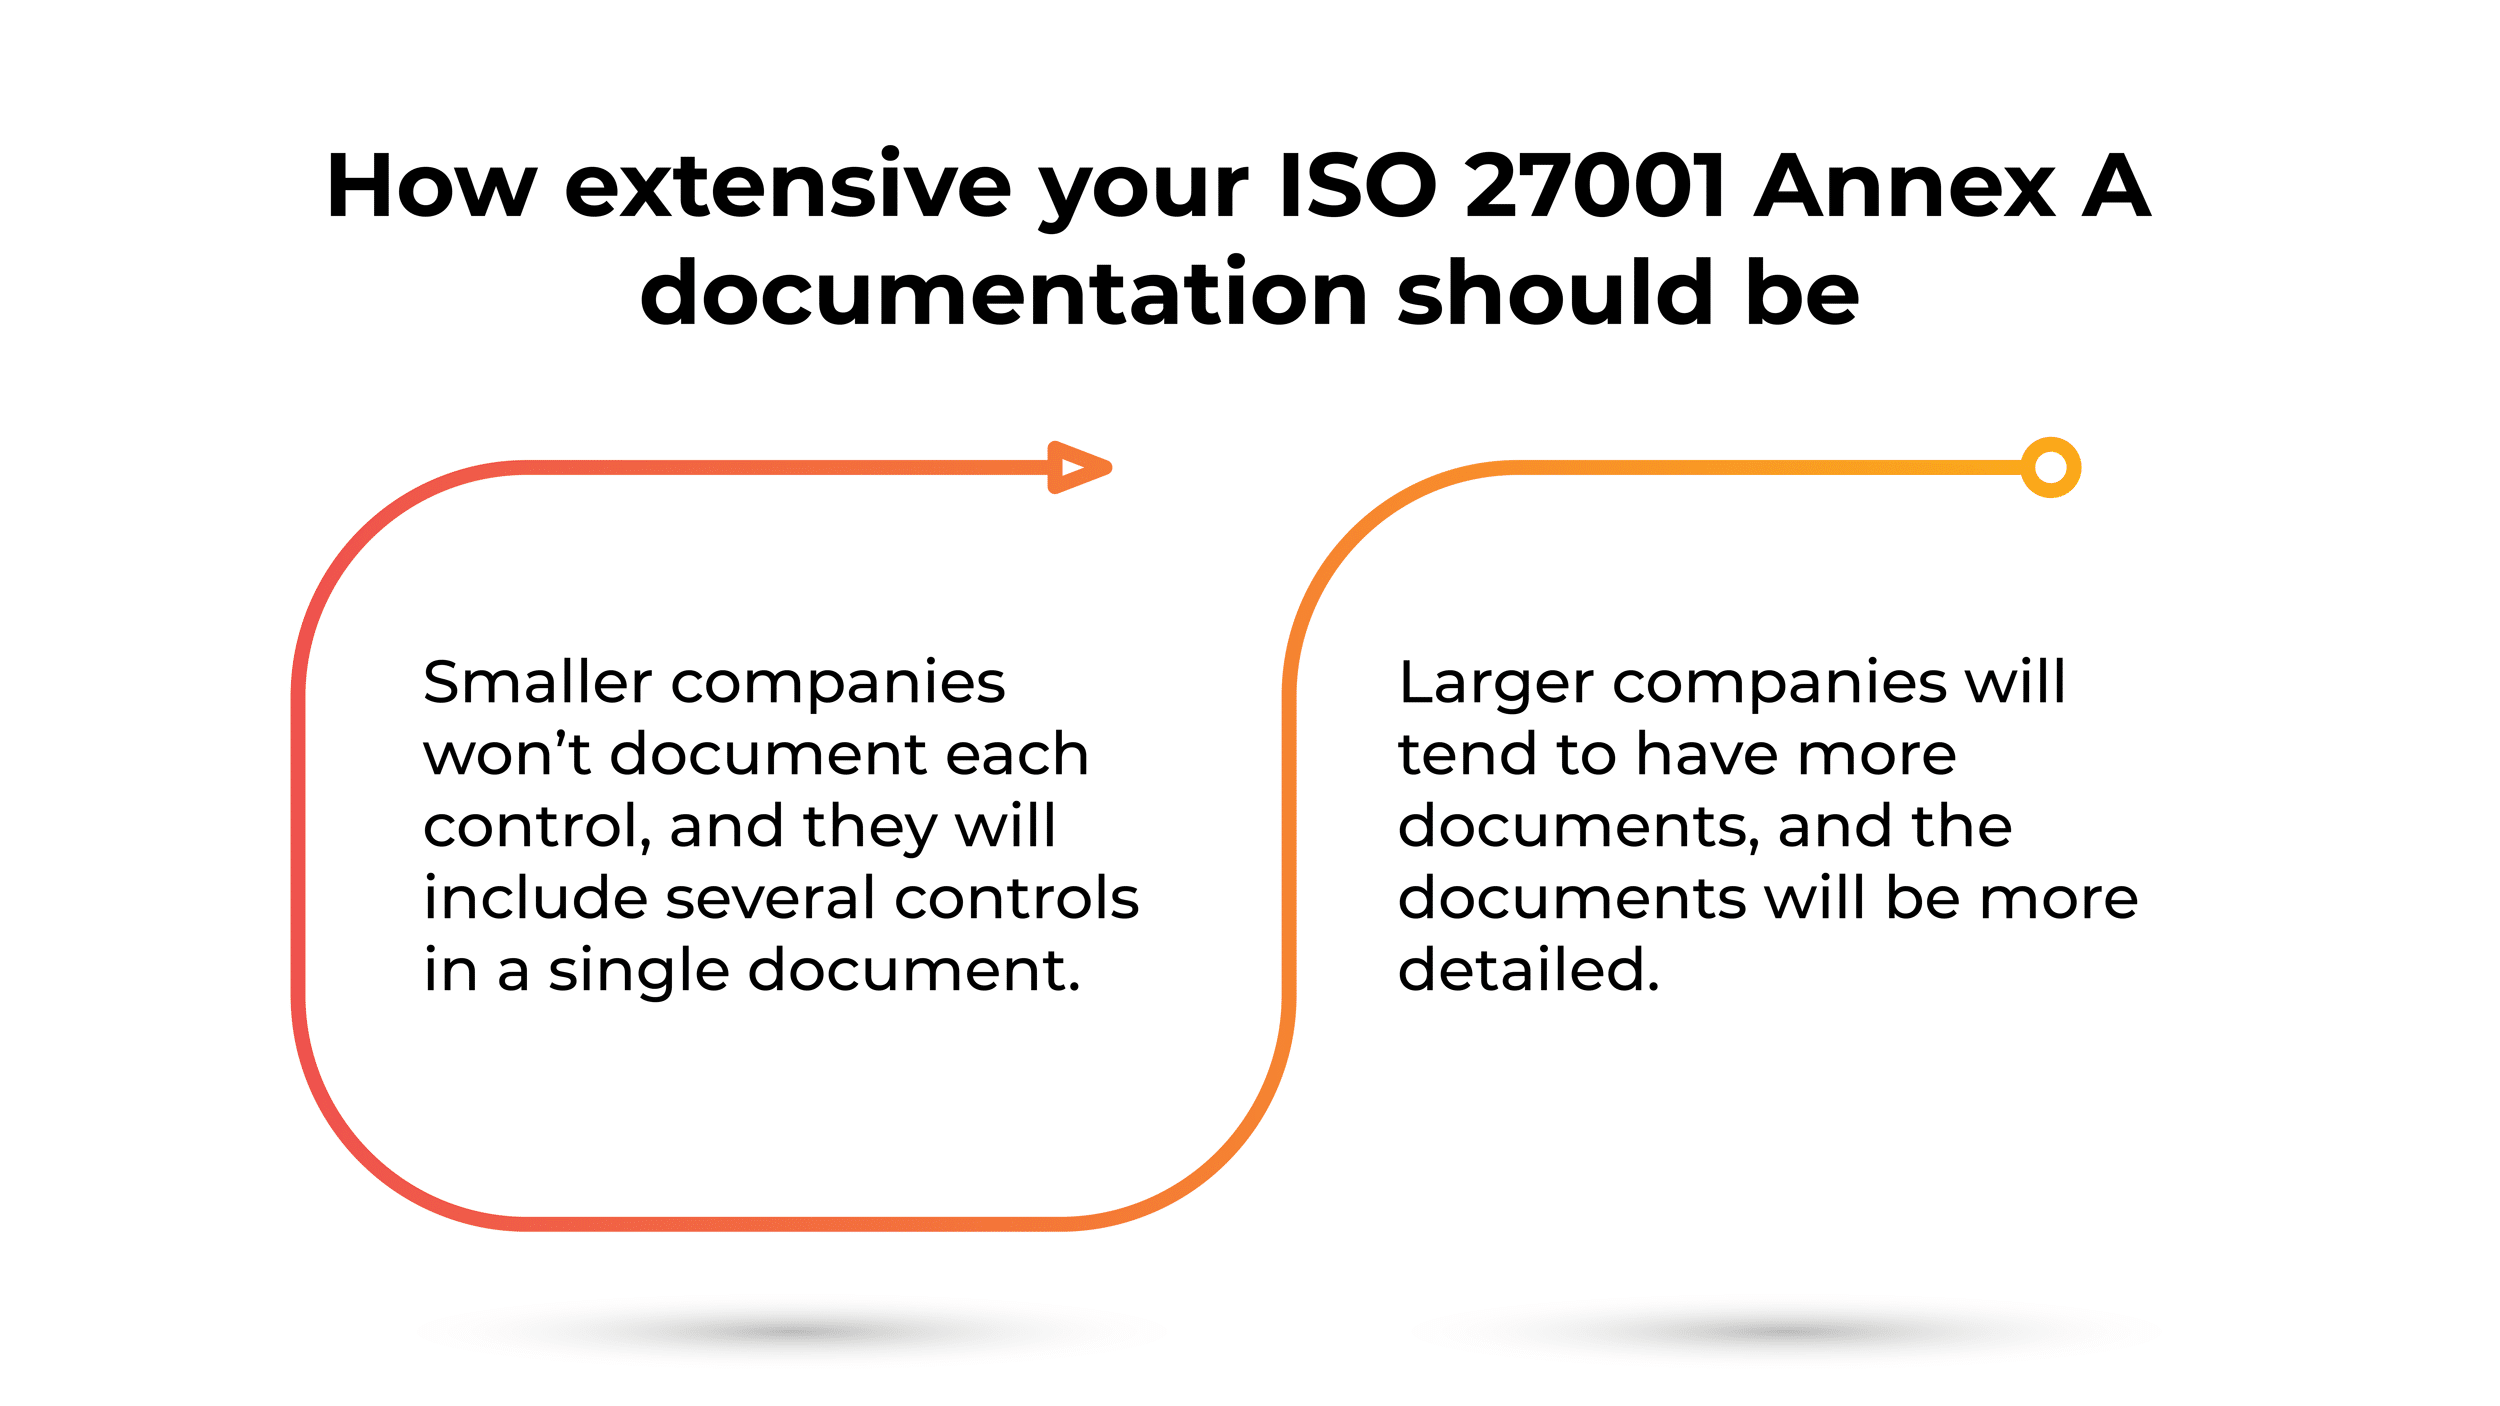 How to structure the documents for ISO 27001 Annex A controls - 27001Academy